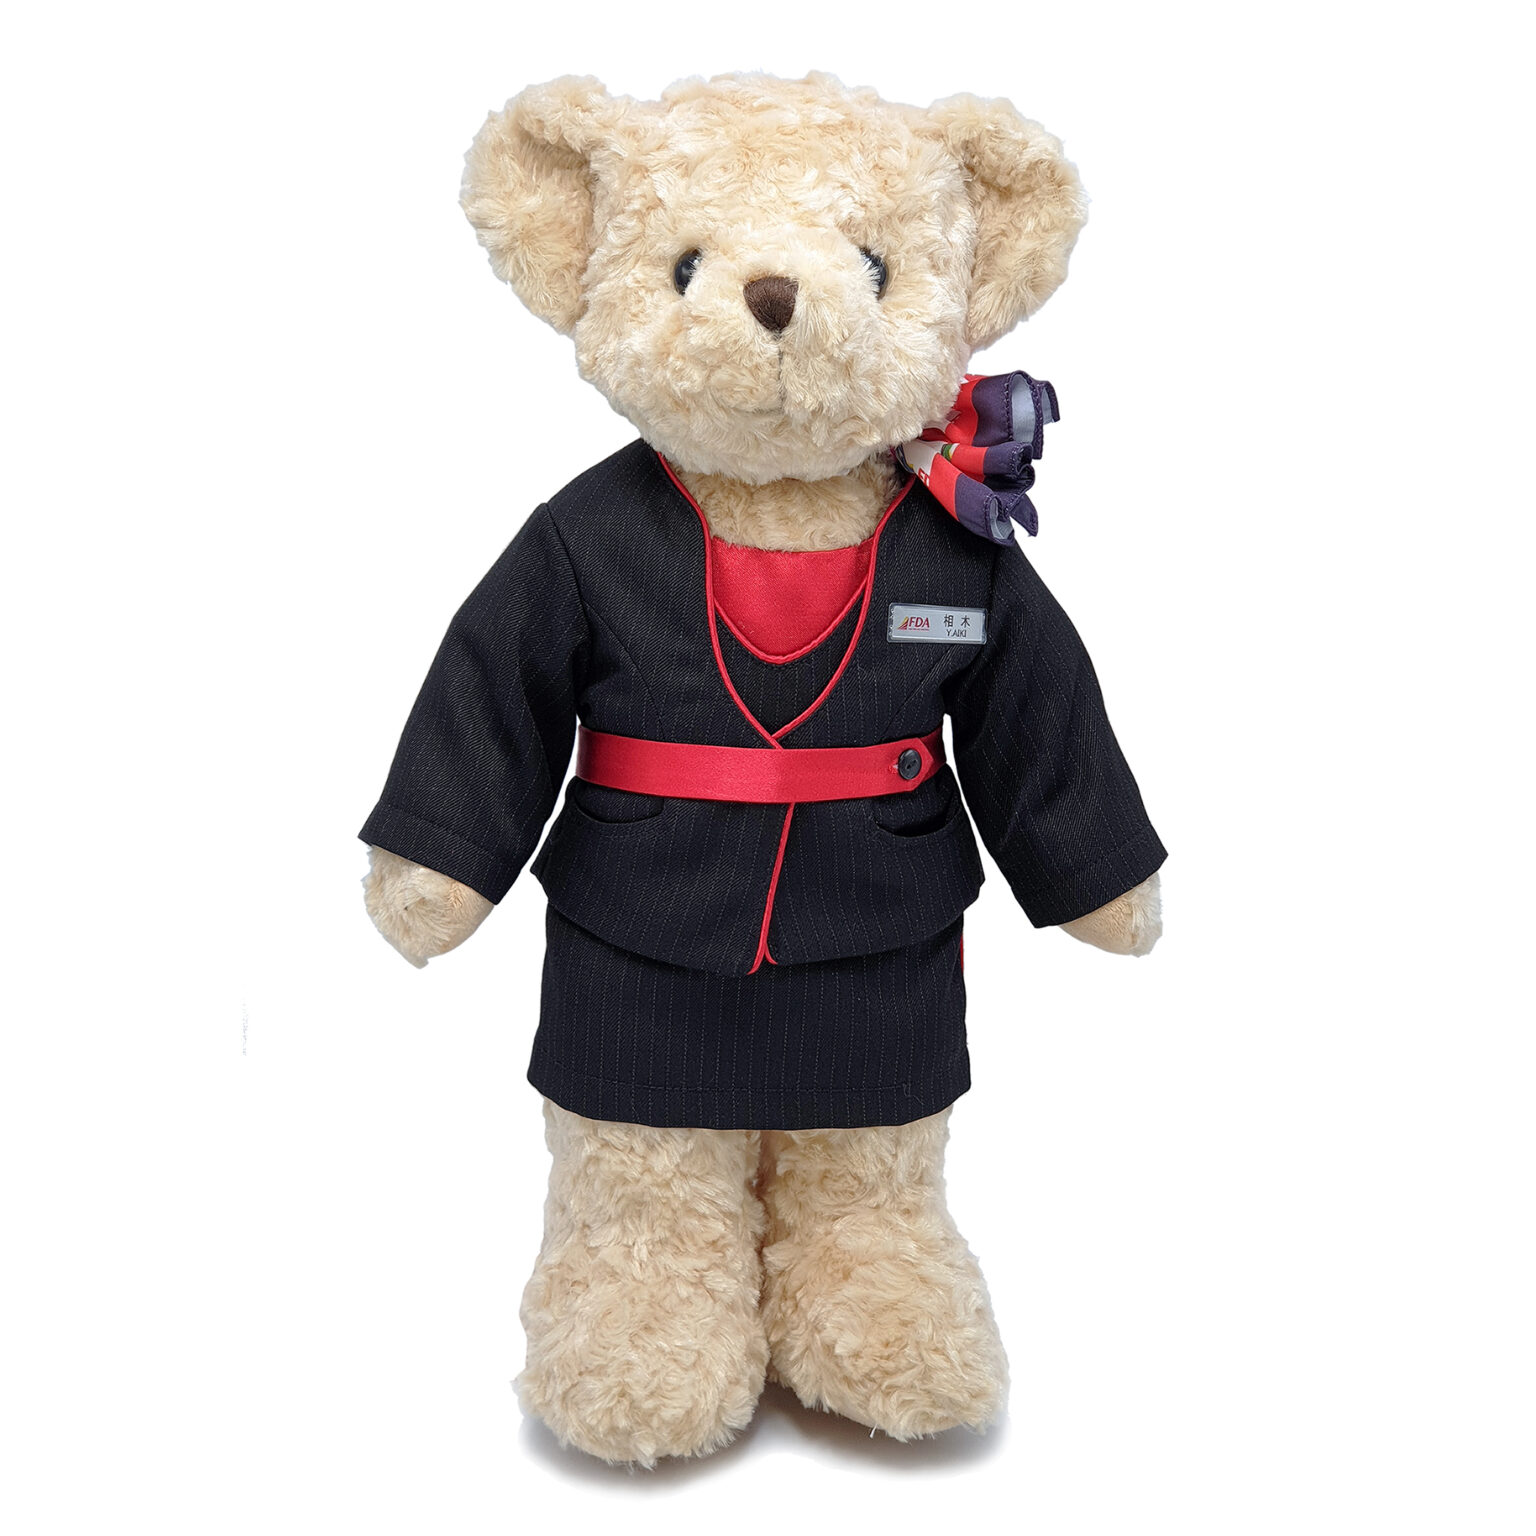 Cabin crew teddy bear Archives - Page 2 of 3 - FourBearsShop